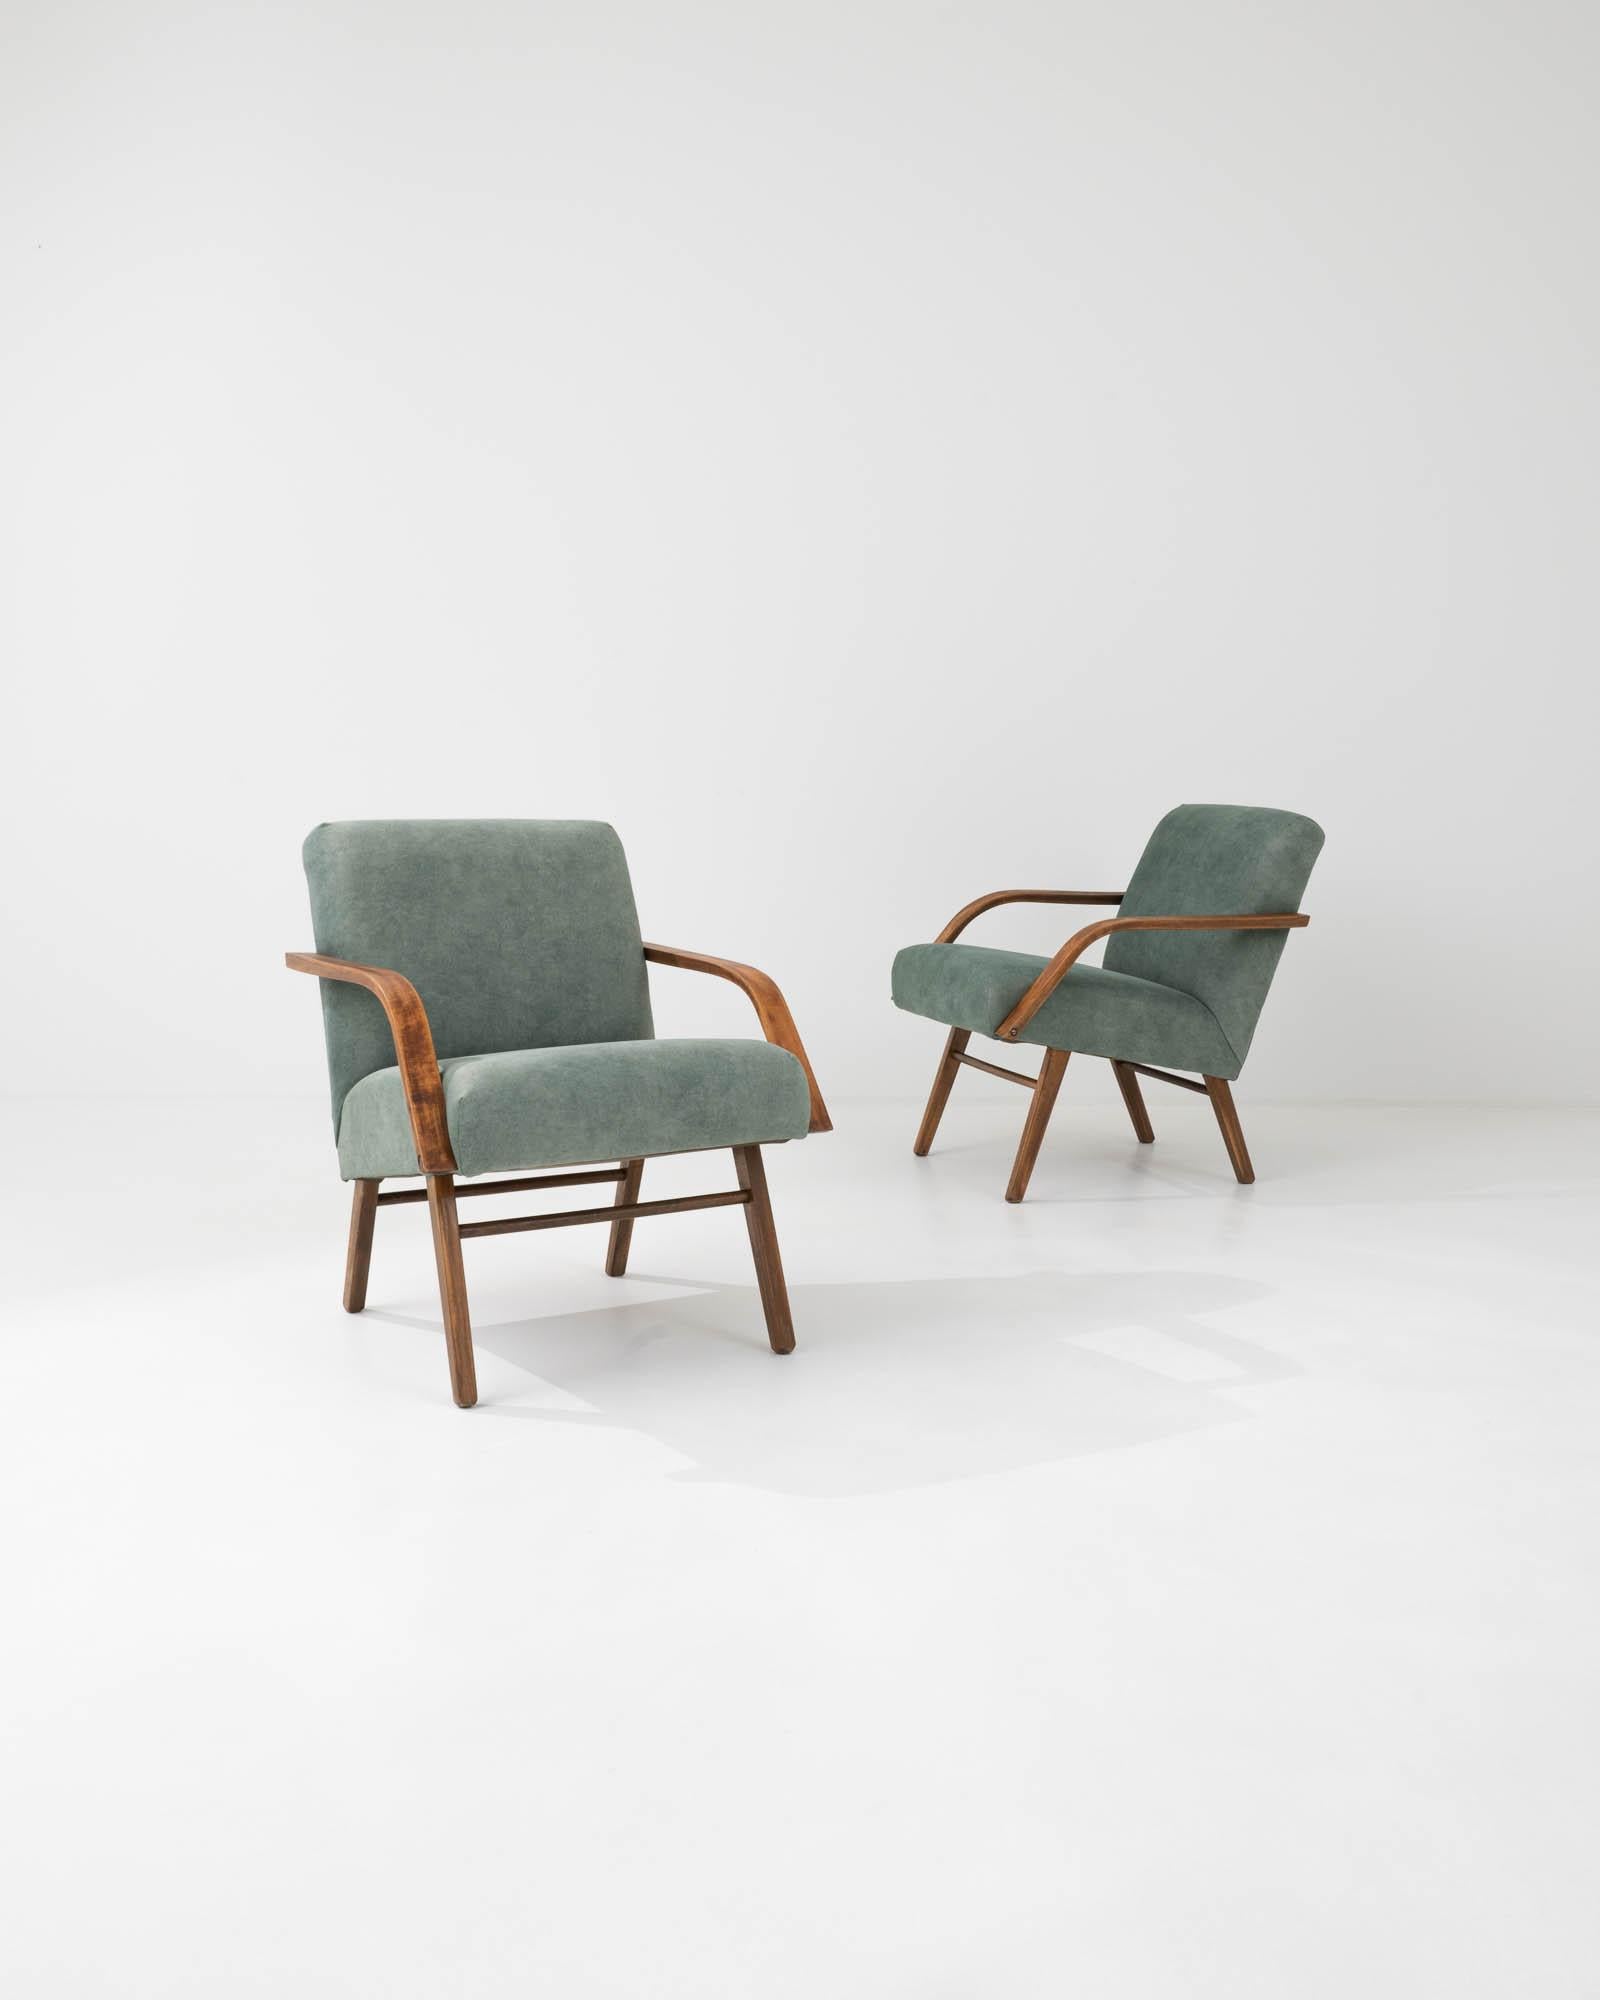 Light and stylish, this pair of Mid-Century armchairs showcase the sophistication of Central European Modernist design. Produced in the former Czechoslovakia, the clean angles of this 1960s design combines tapered legs and slender bentwood armrests